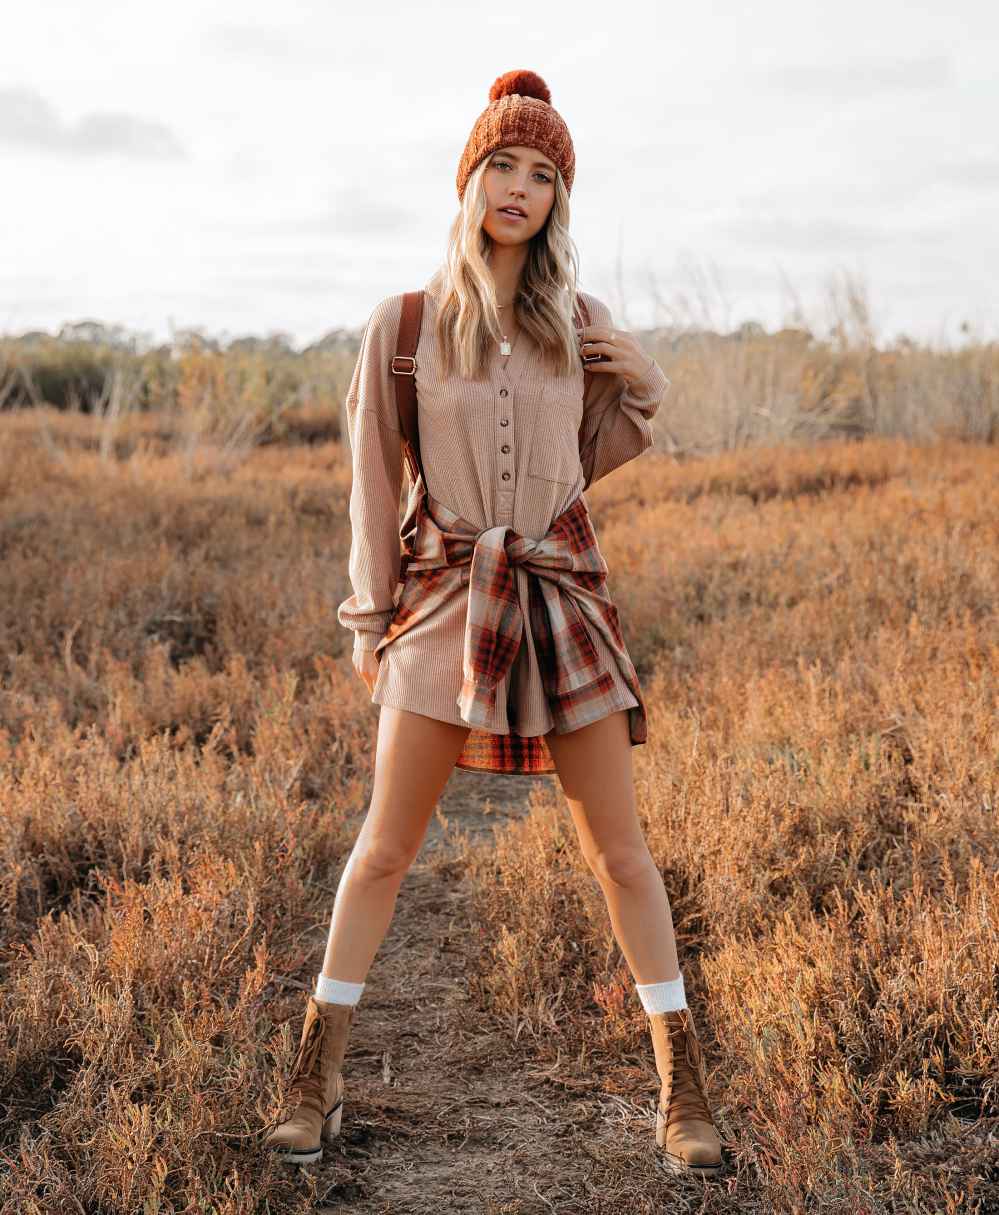 Go Exploring In These Adventure Ready Outfits